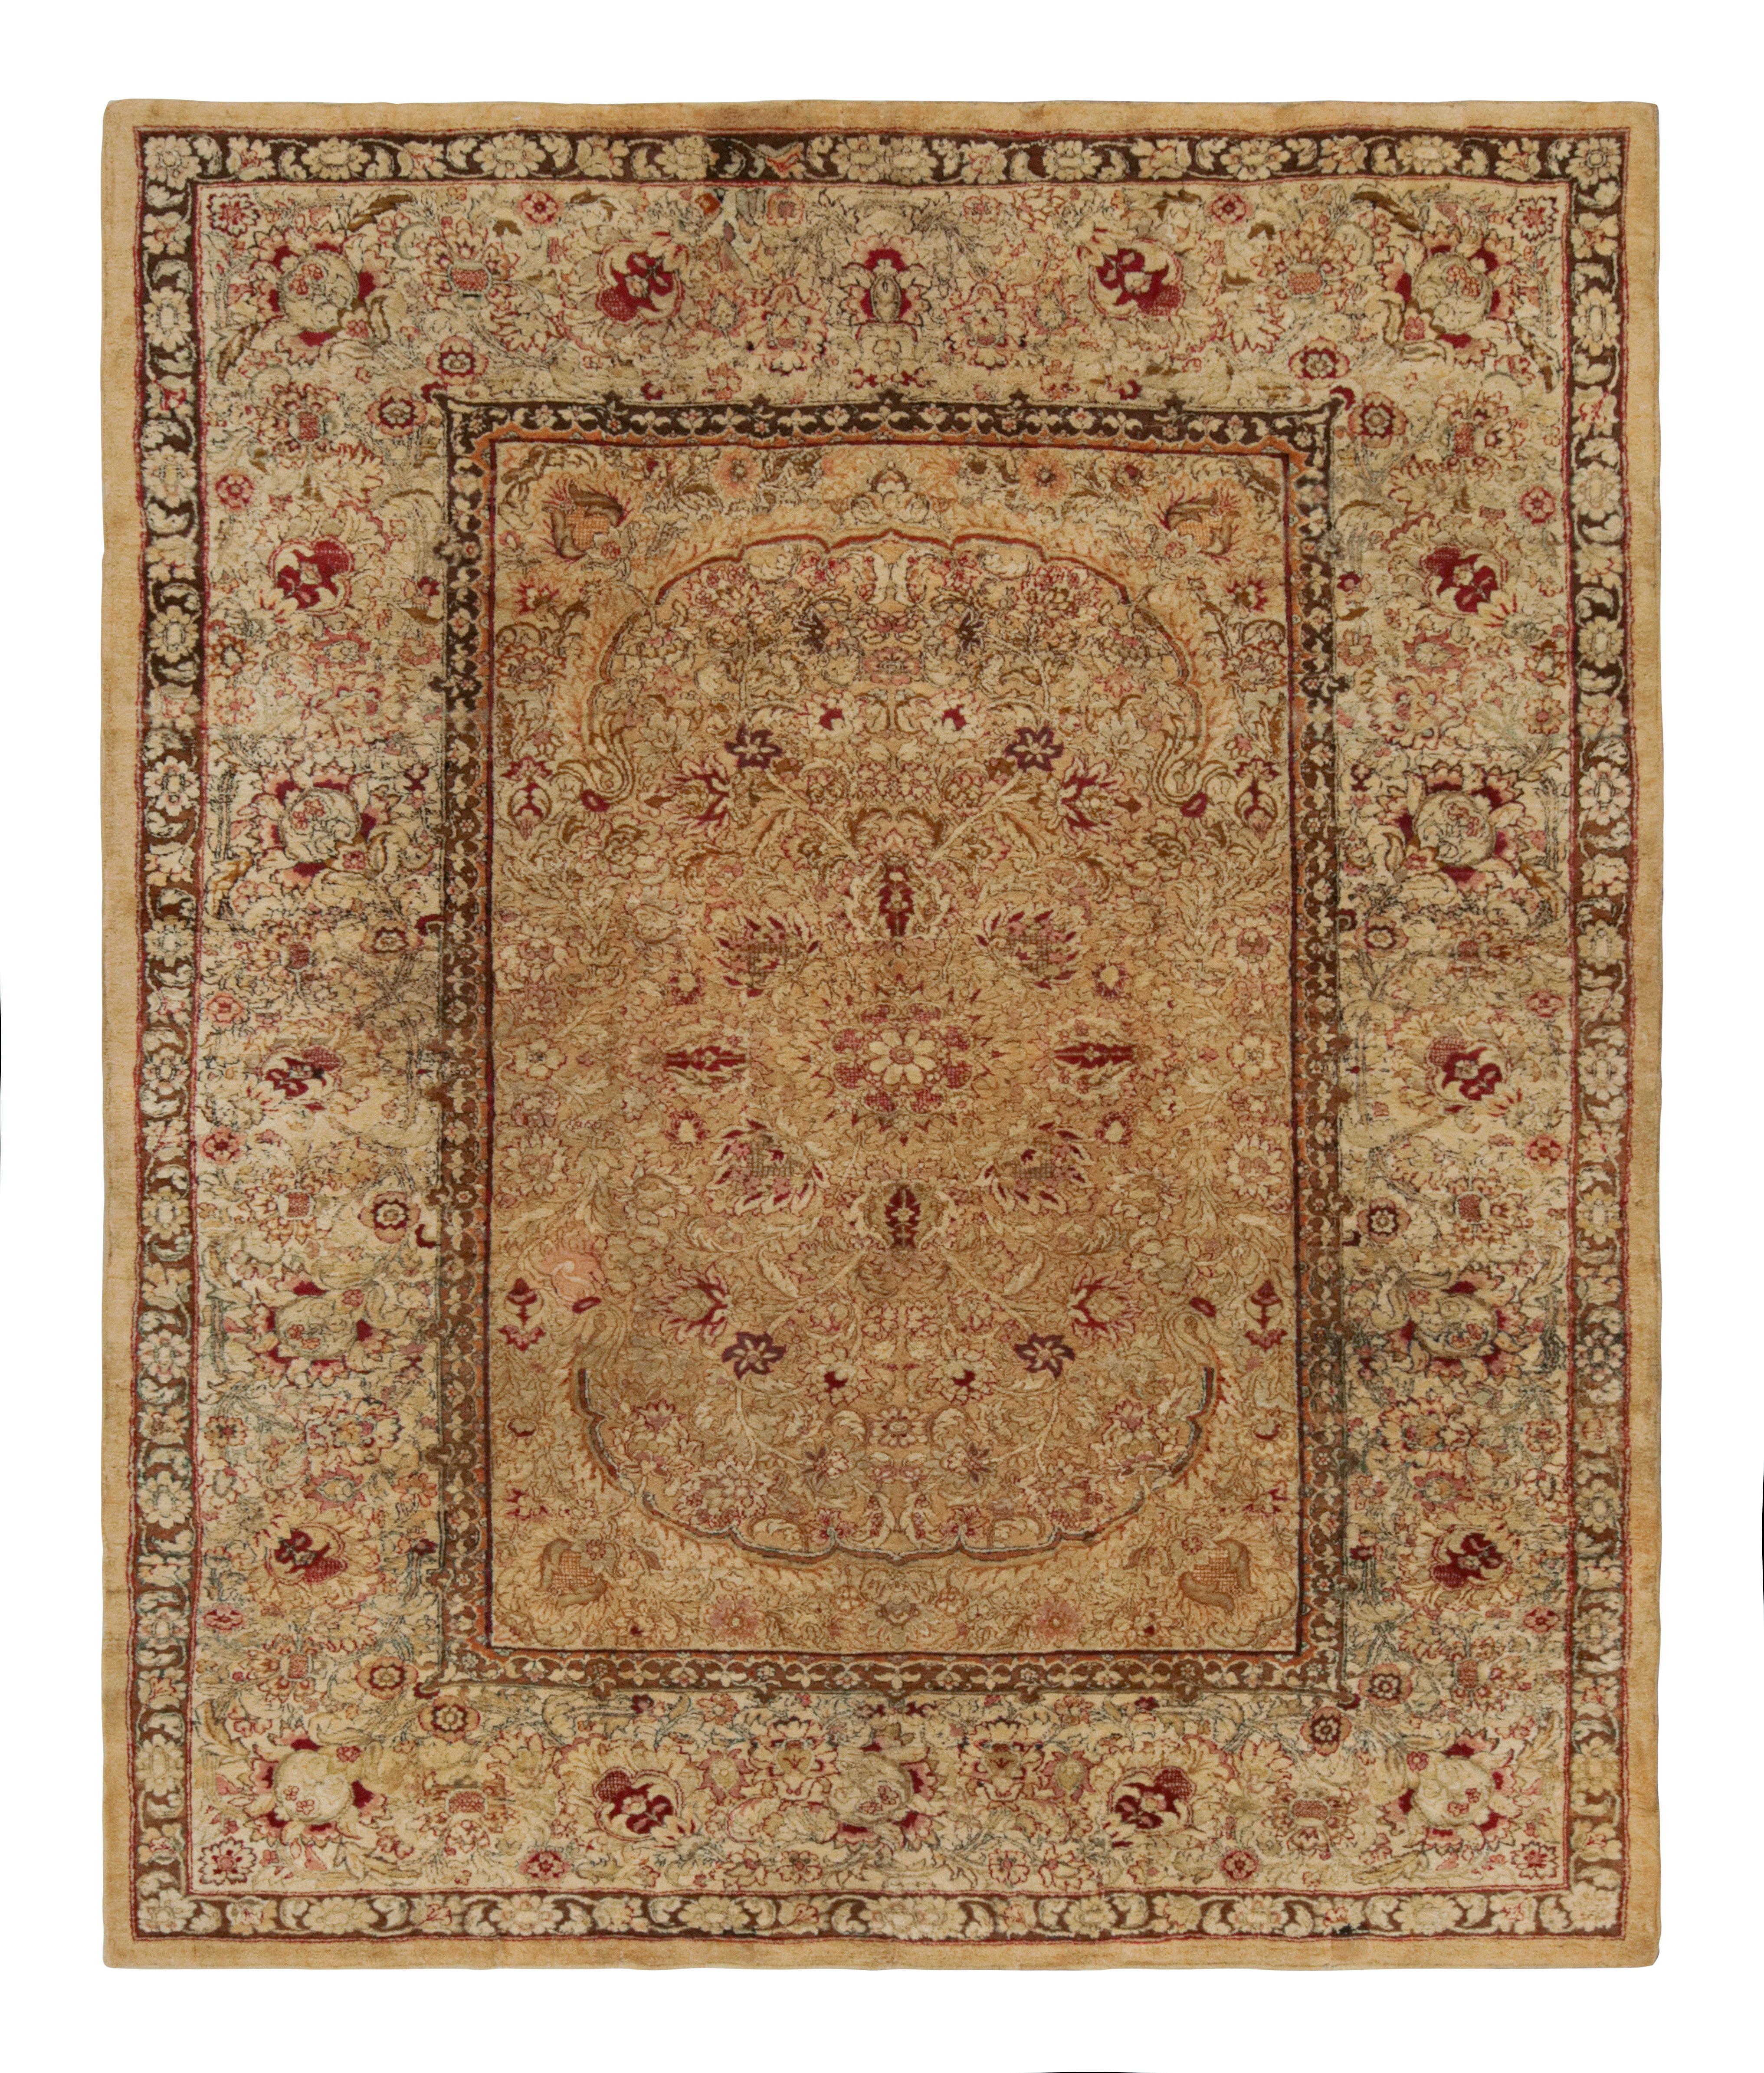 Antique Agra Rug in Gold and Brown with Floral Patterns